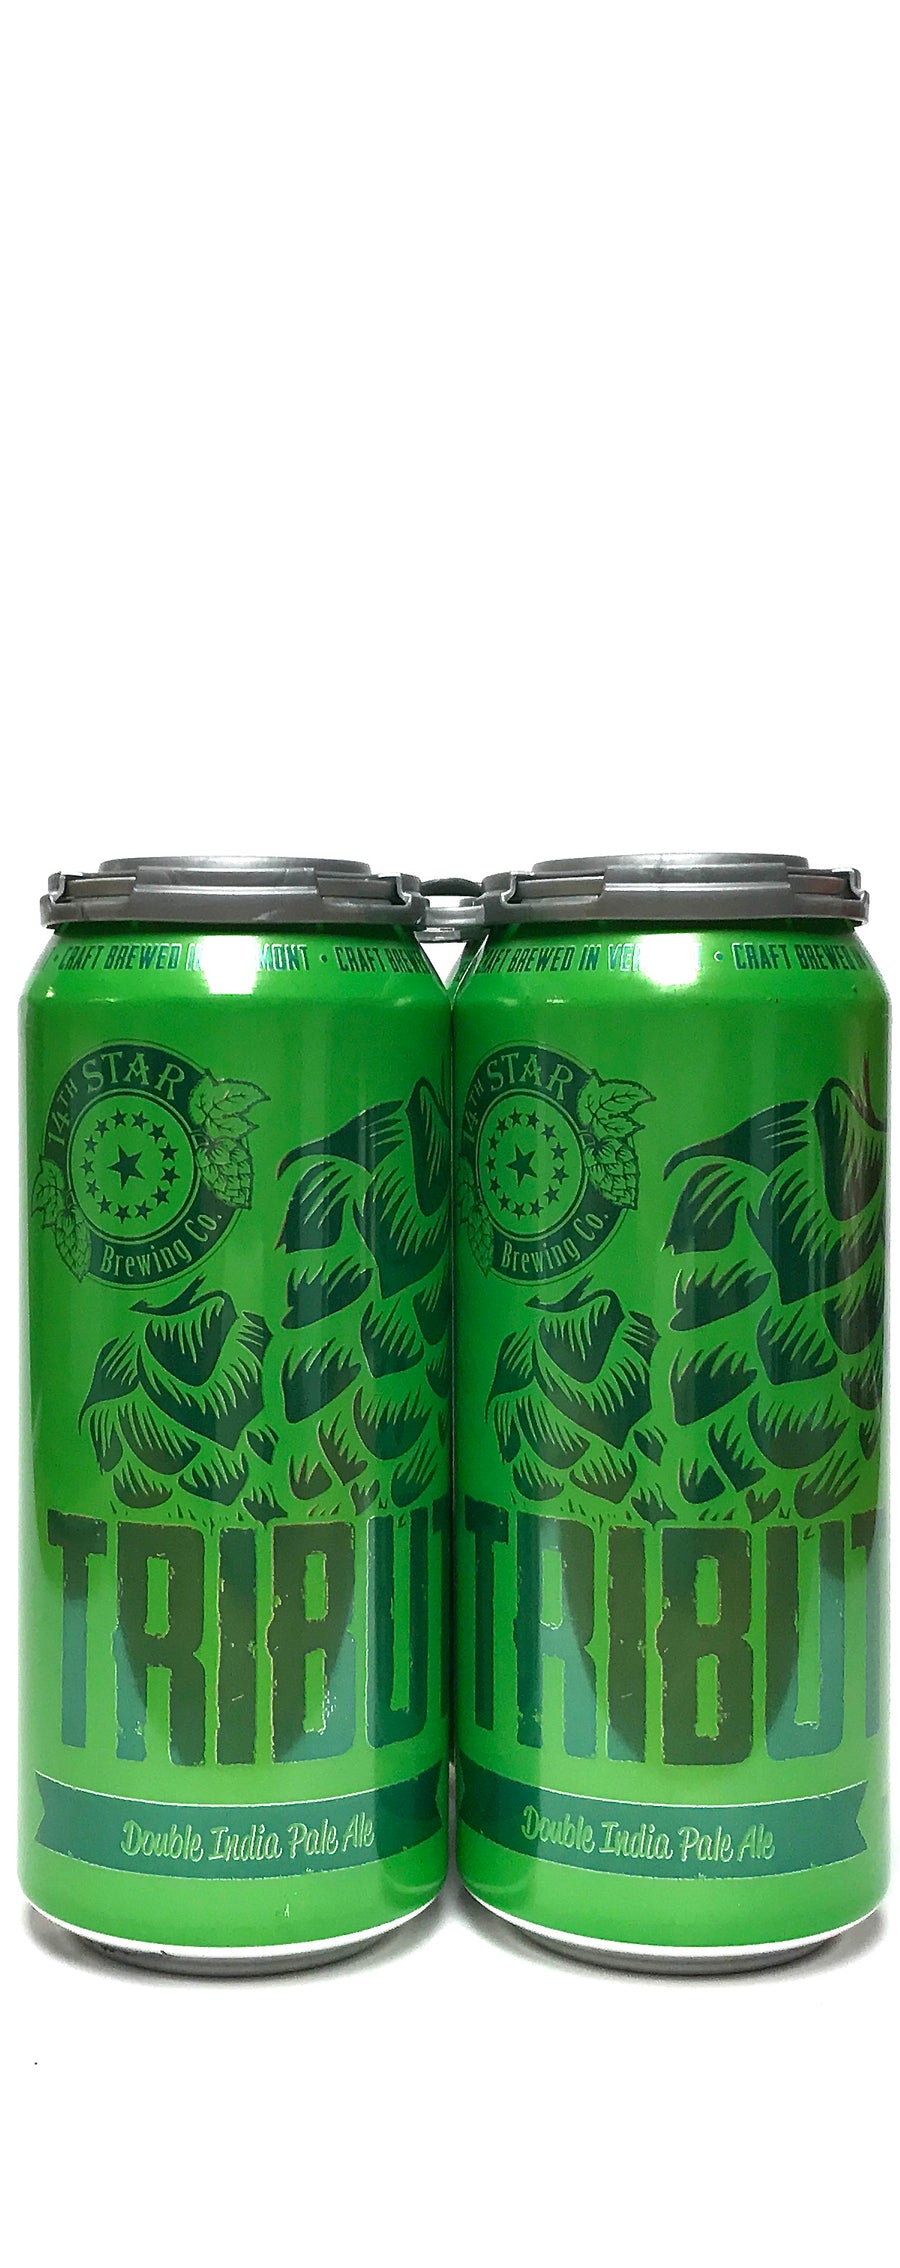 14 Star Tribute Double IPA 16oz Can 4-Pack